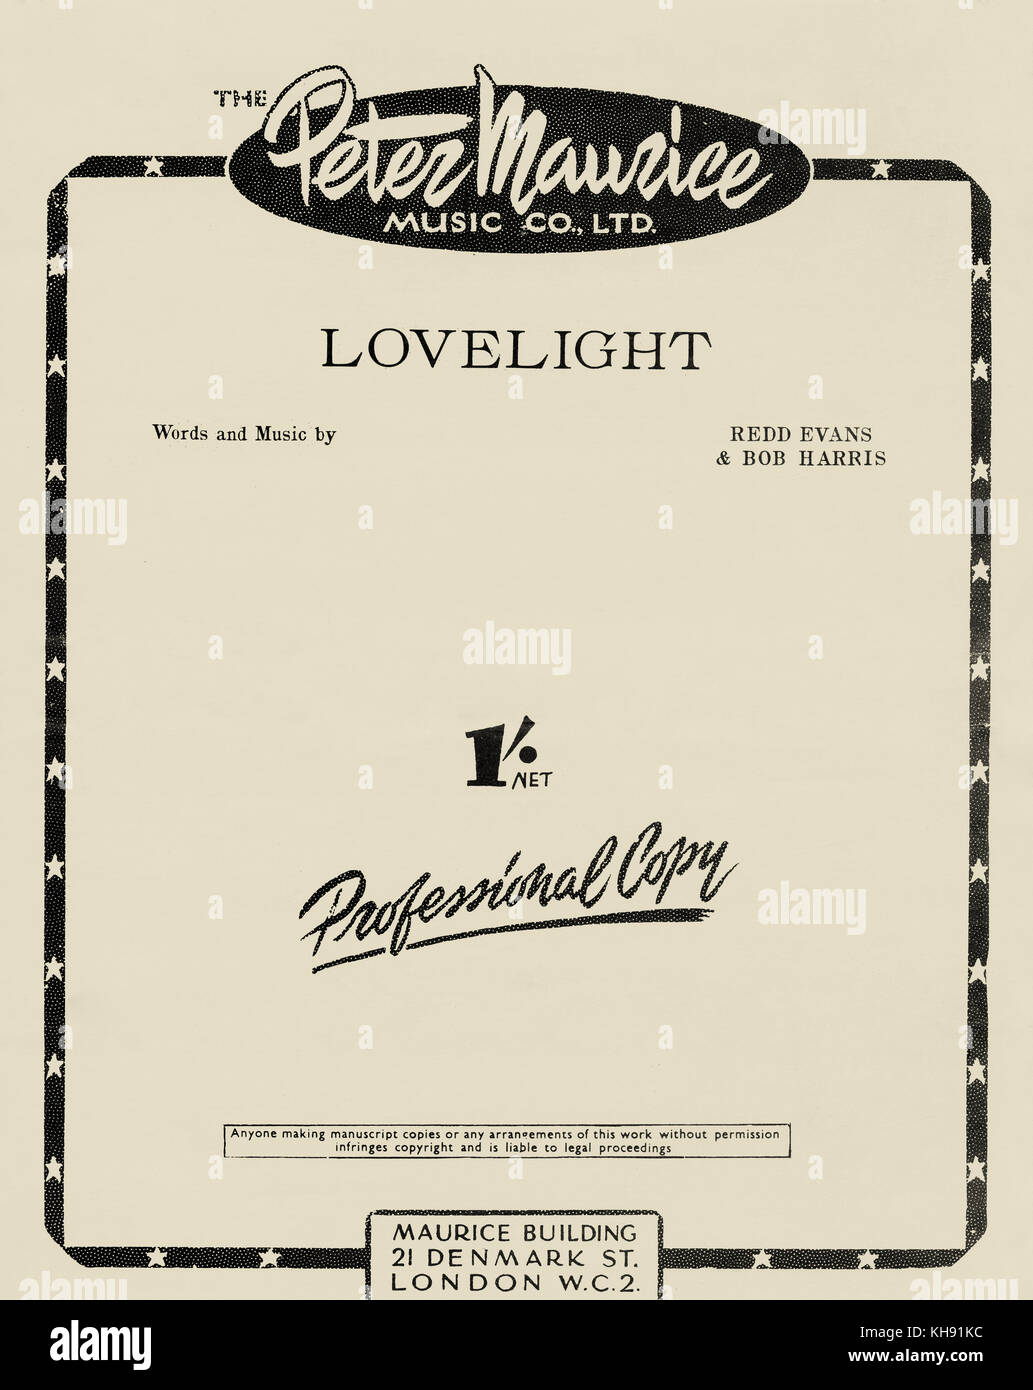 Lovelight song with words and music by Redd Evans Bob Harris. Score cover. Pulished by Peter Maurice Music Co, Ltd, London, UK, 1952 Stock Photo - Alamy